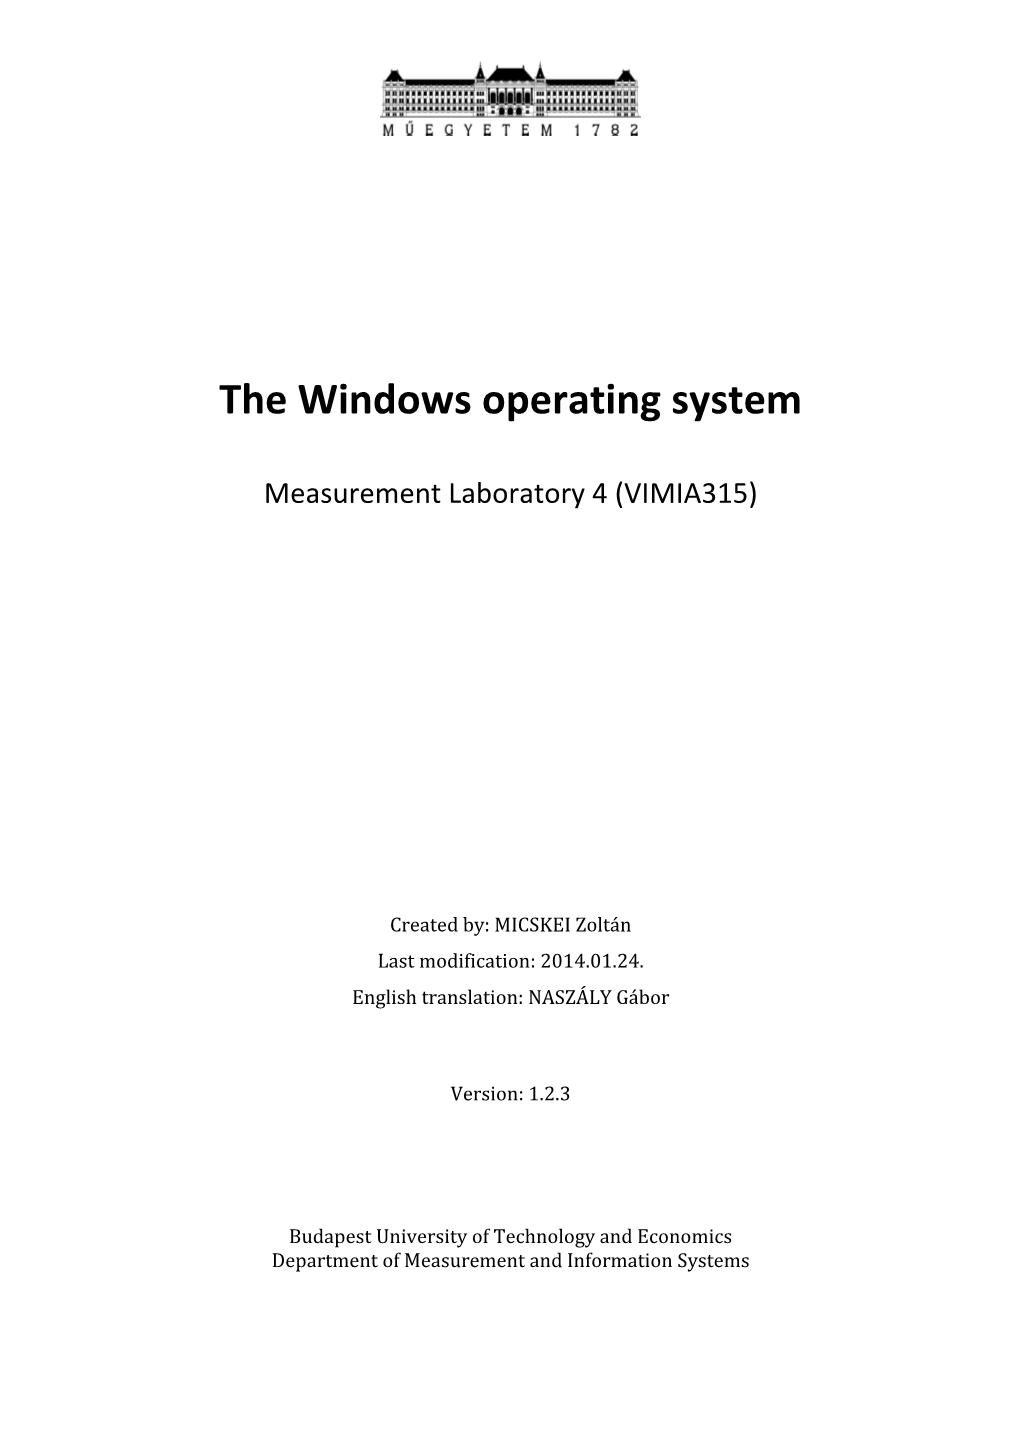 The Windows Operating System